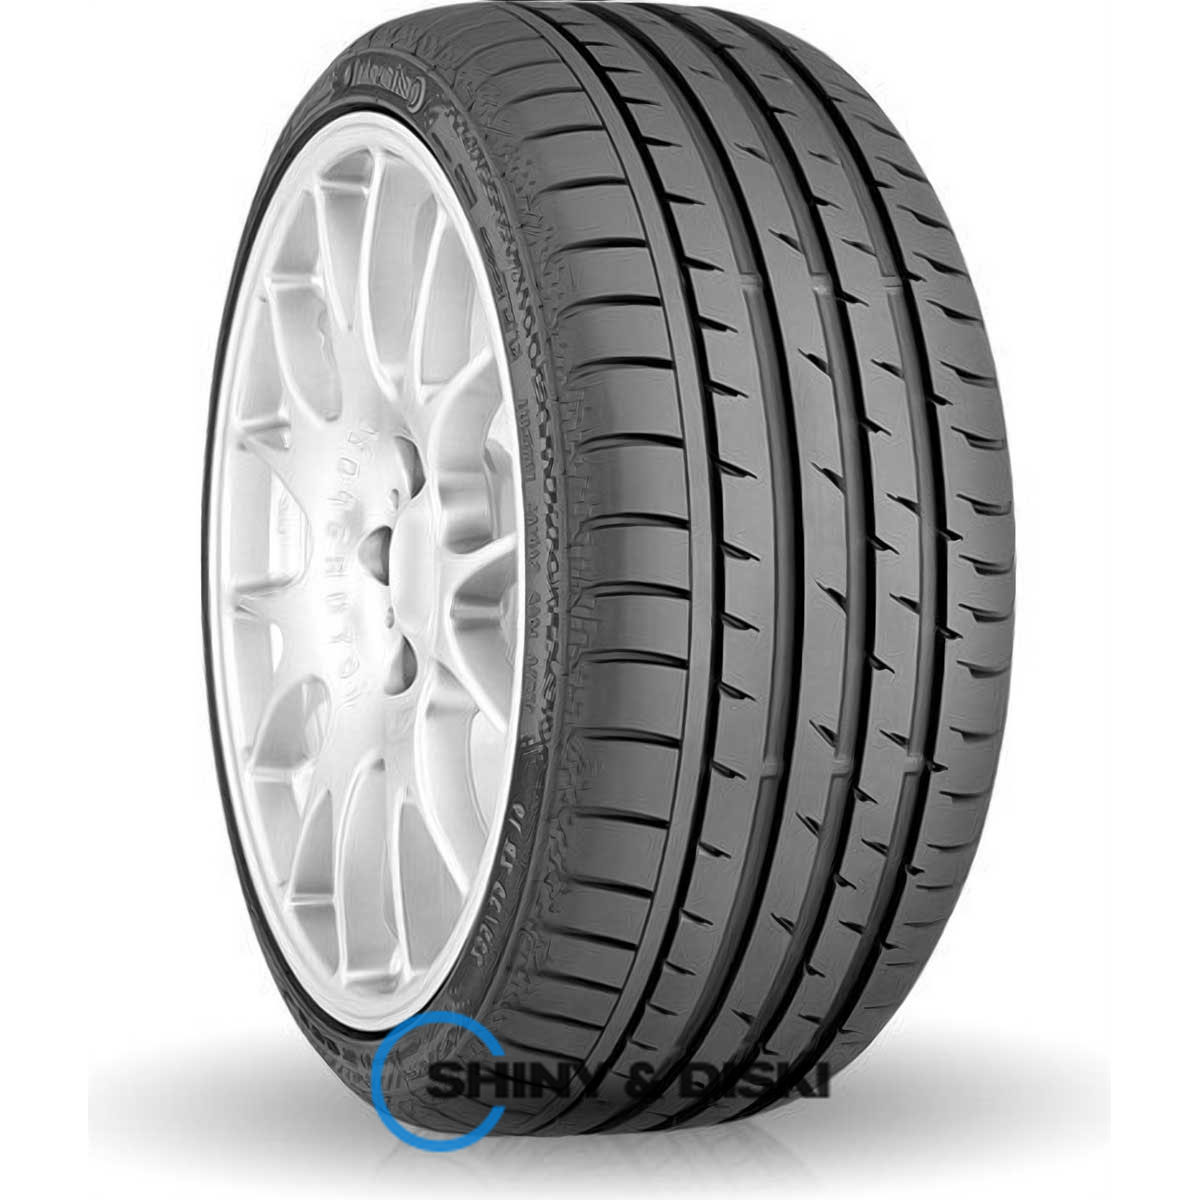 резина continental sportcontact 3 275/35 r18 99y